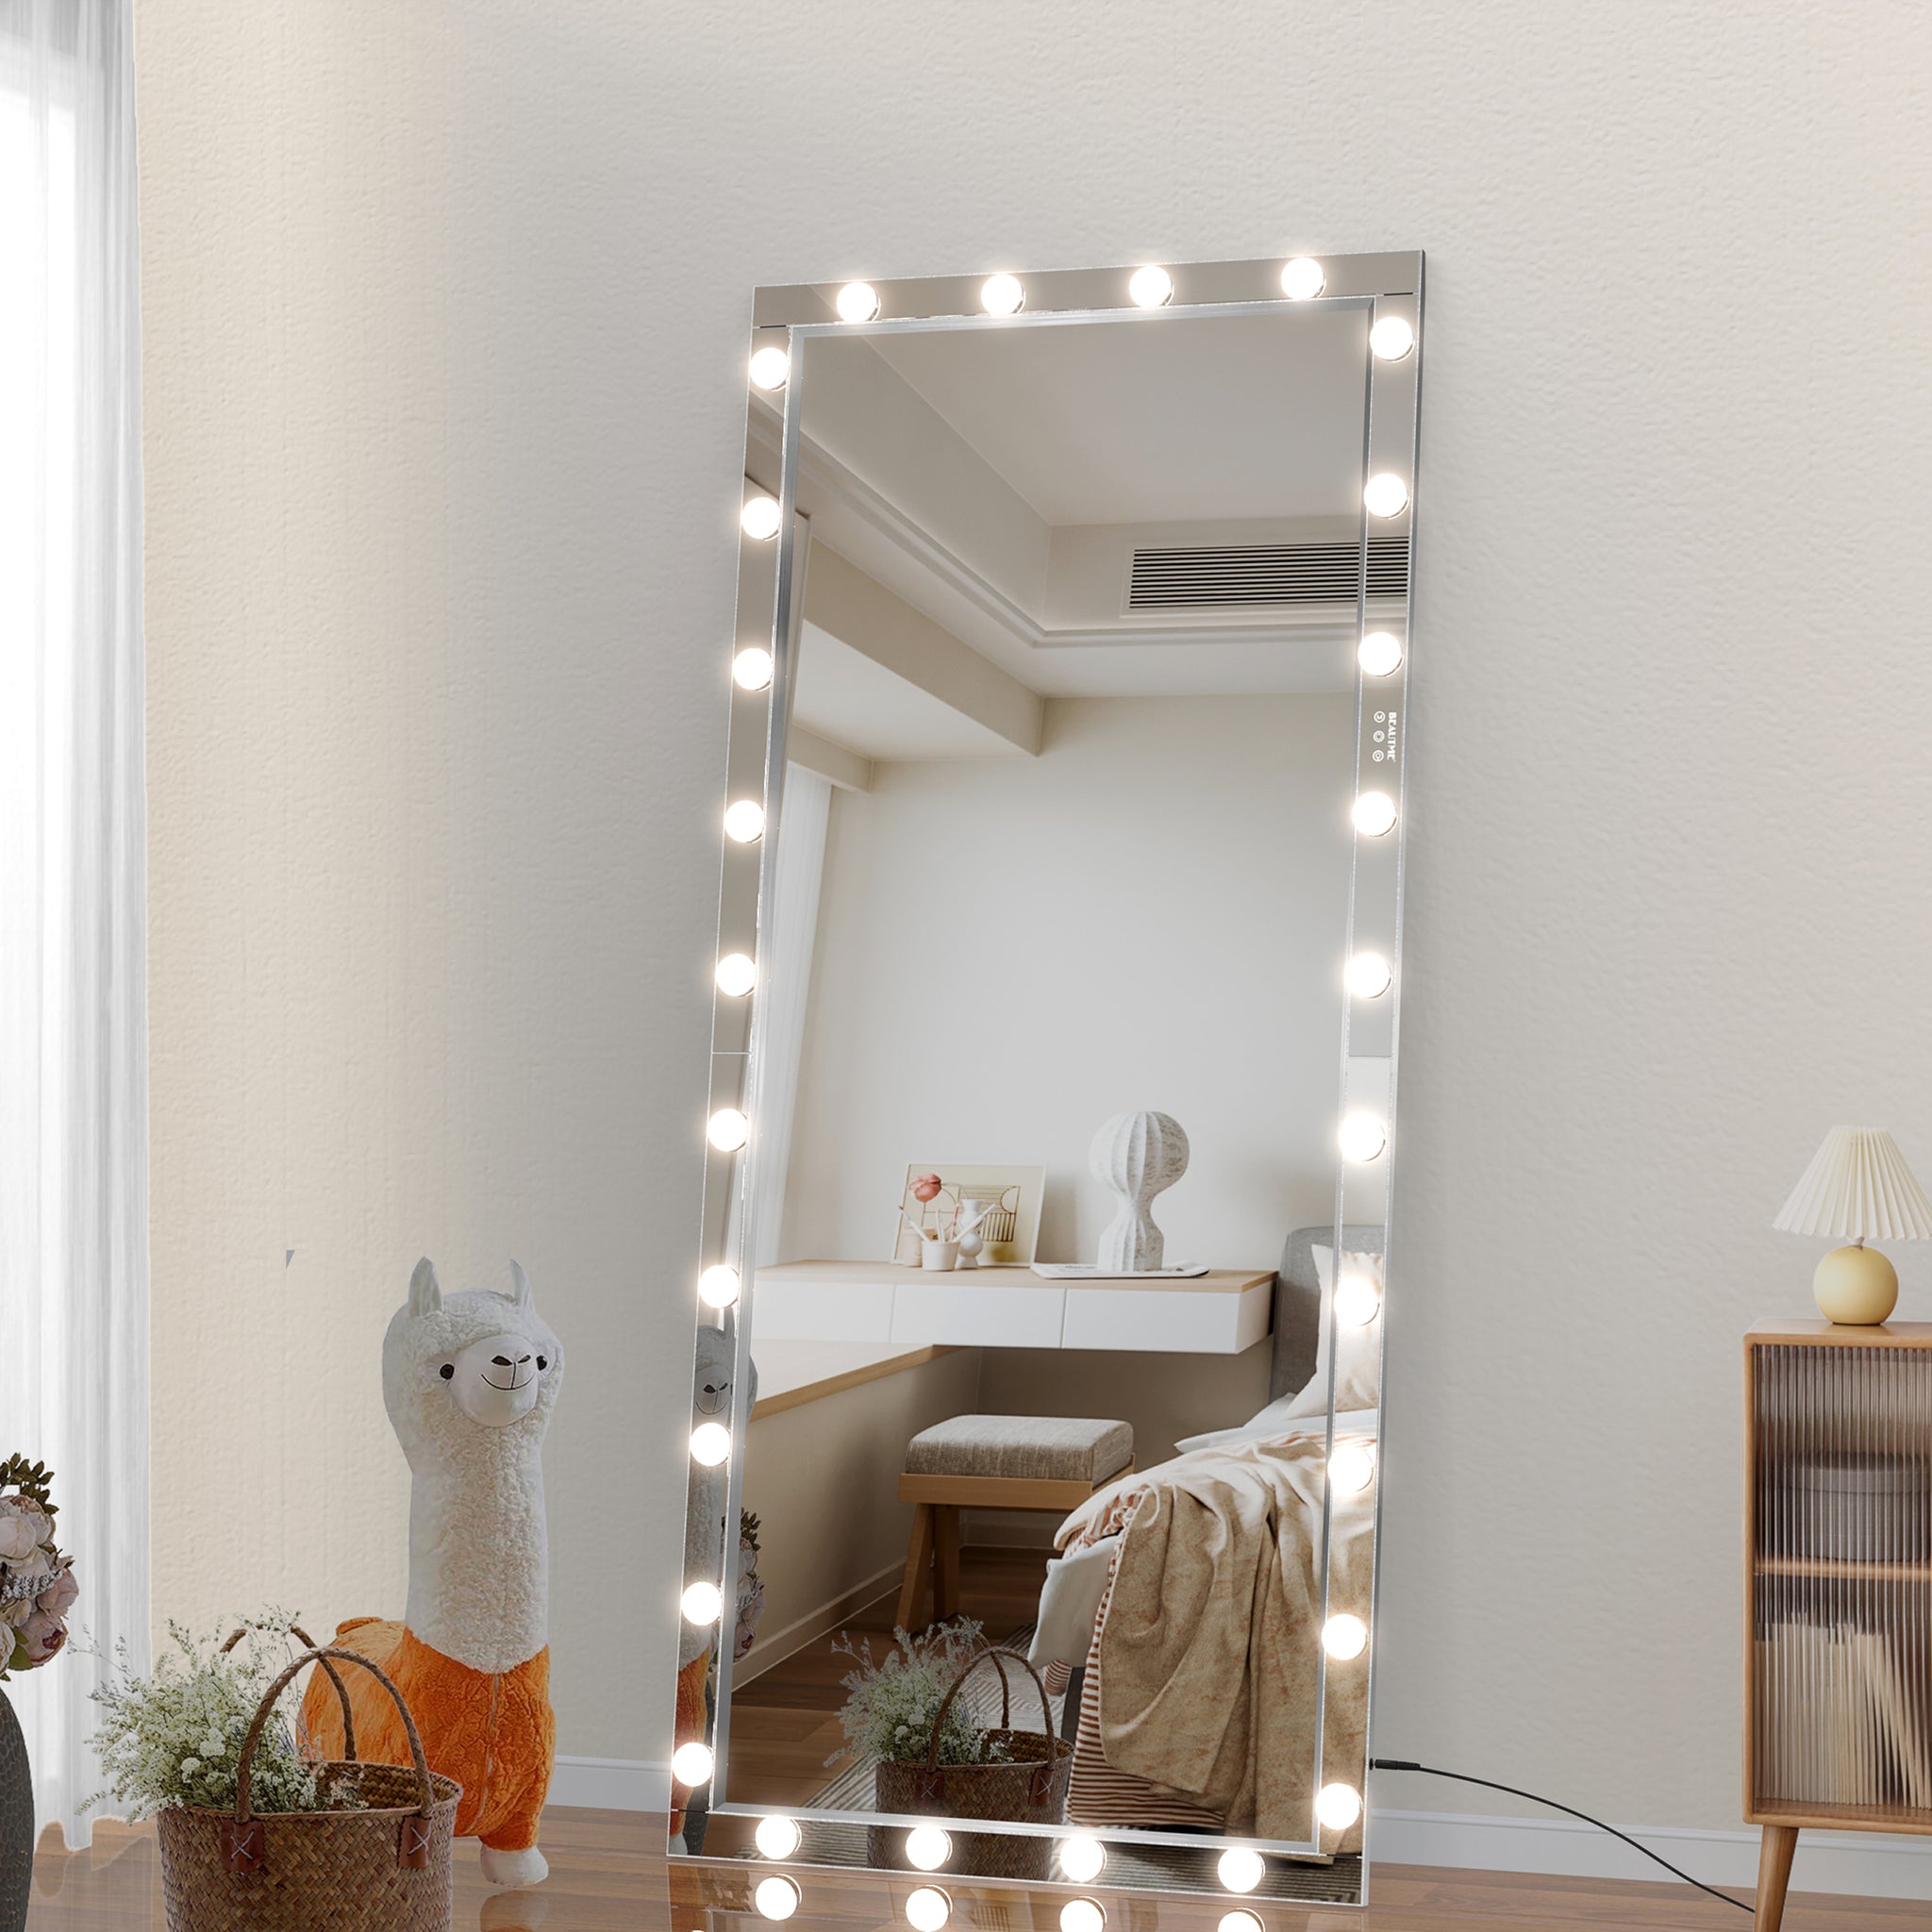 Hollywood LED Full Body Mirror with Lights Extra Large silver-aluminium